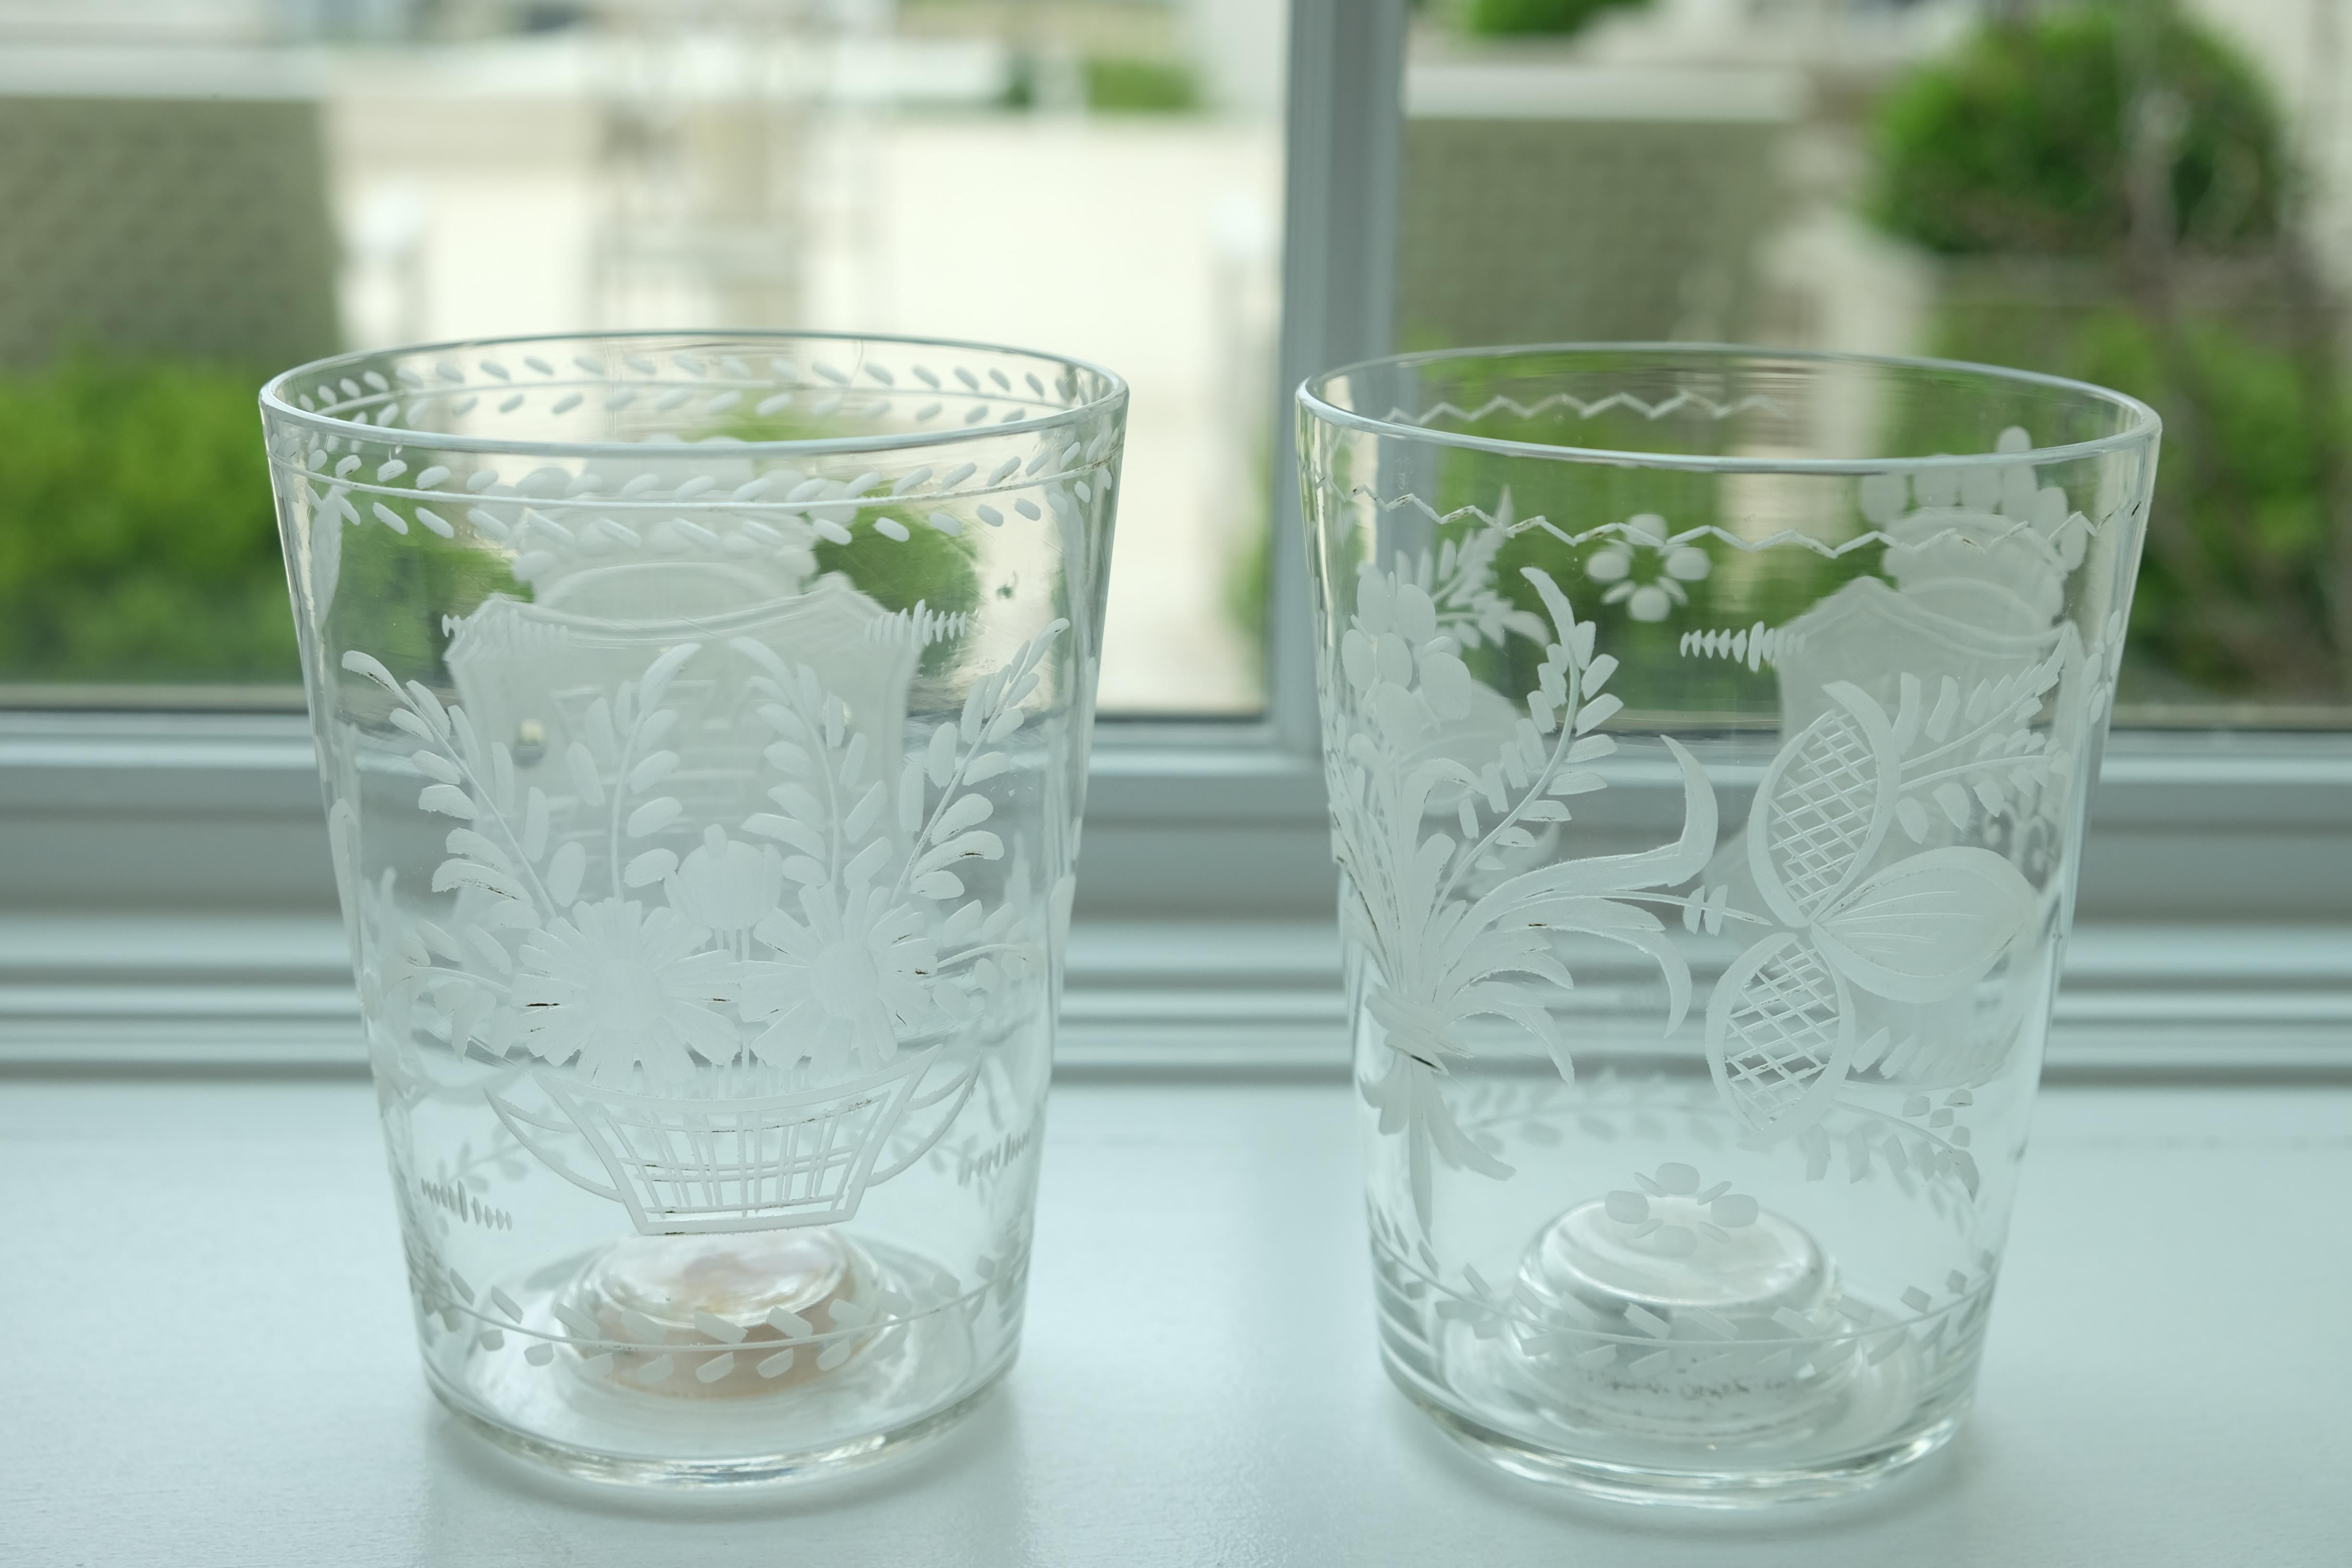 Pair of engraved armorial beakers. The first is a 